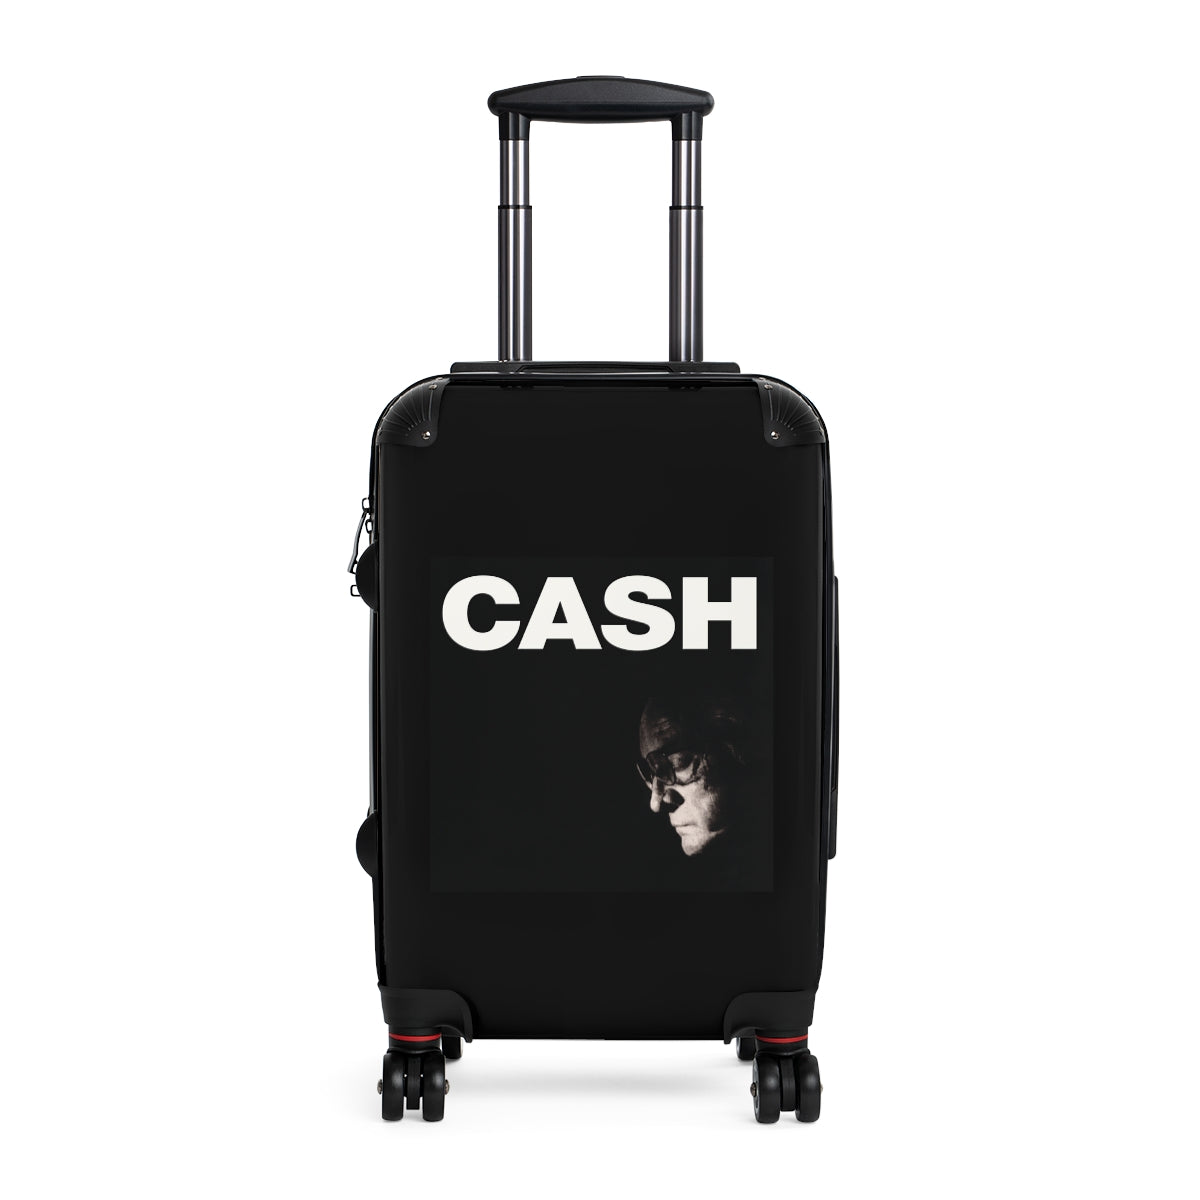 Getrott Johnny Cash Black Cabin Suitcase Inner Pockets Extended Storage Adjustable Telescopic Handle Inner Pockets Double wheeled Polycarbonate Hard-shell Built-in Lock Carry-On Travel Check Luggage 4-Wheel Spinner Suitcase Bag Multiple Colors and Sizes